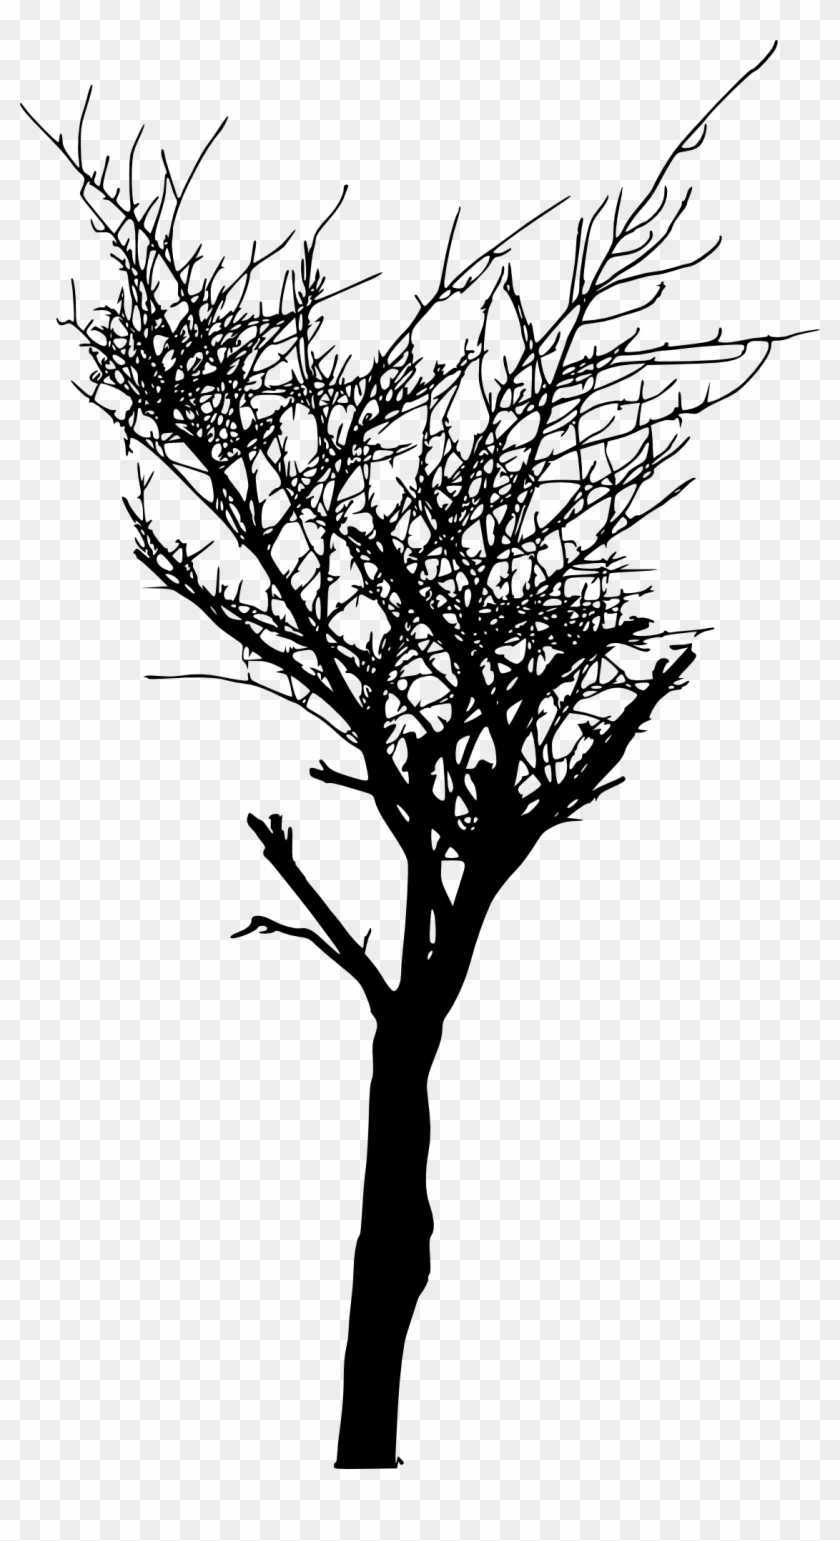 Free Download - Bare Tree Silhouette Transparent #696359